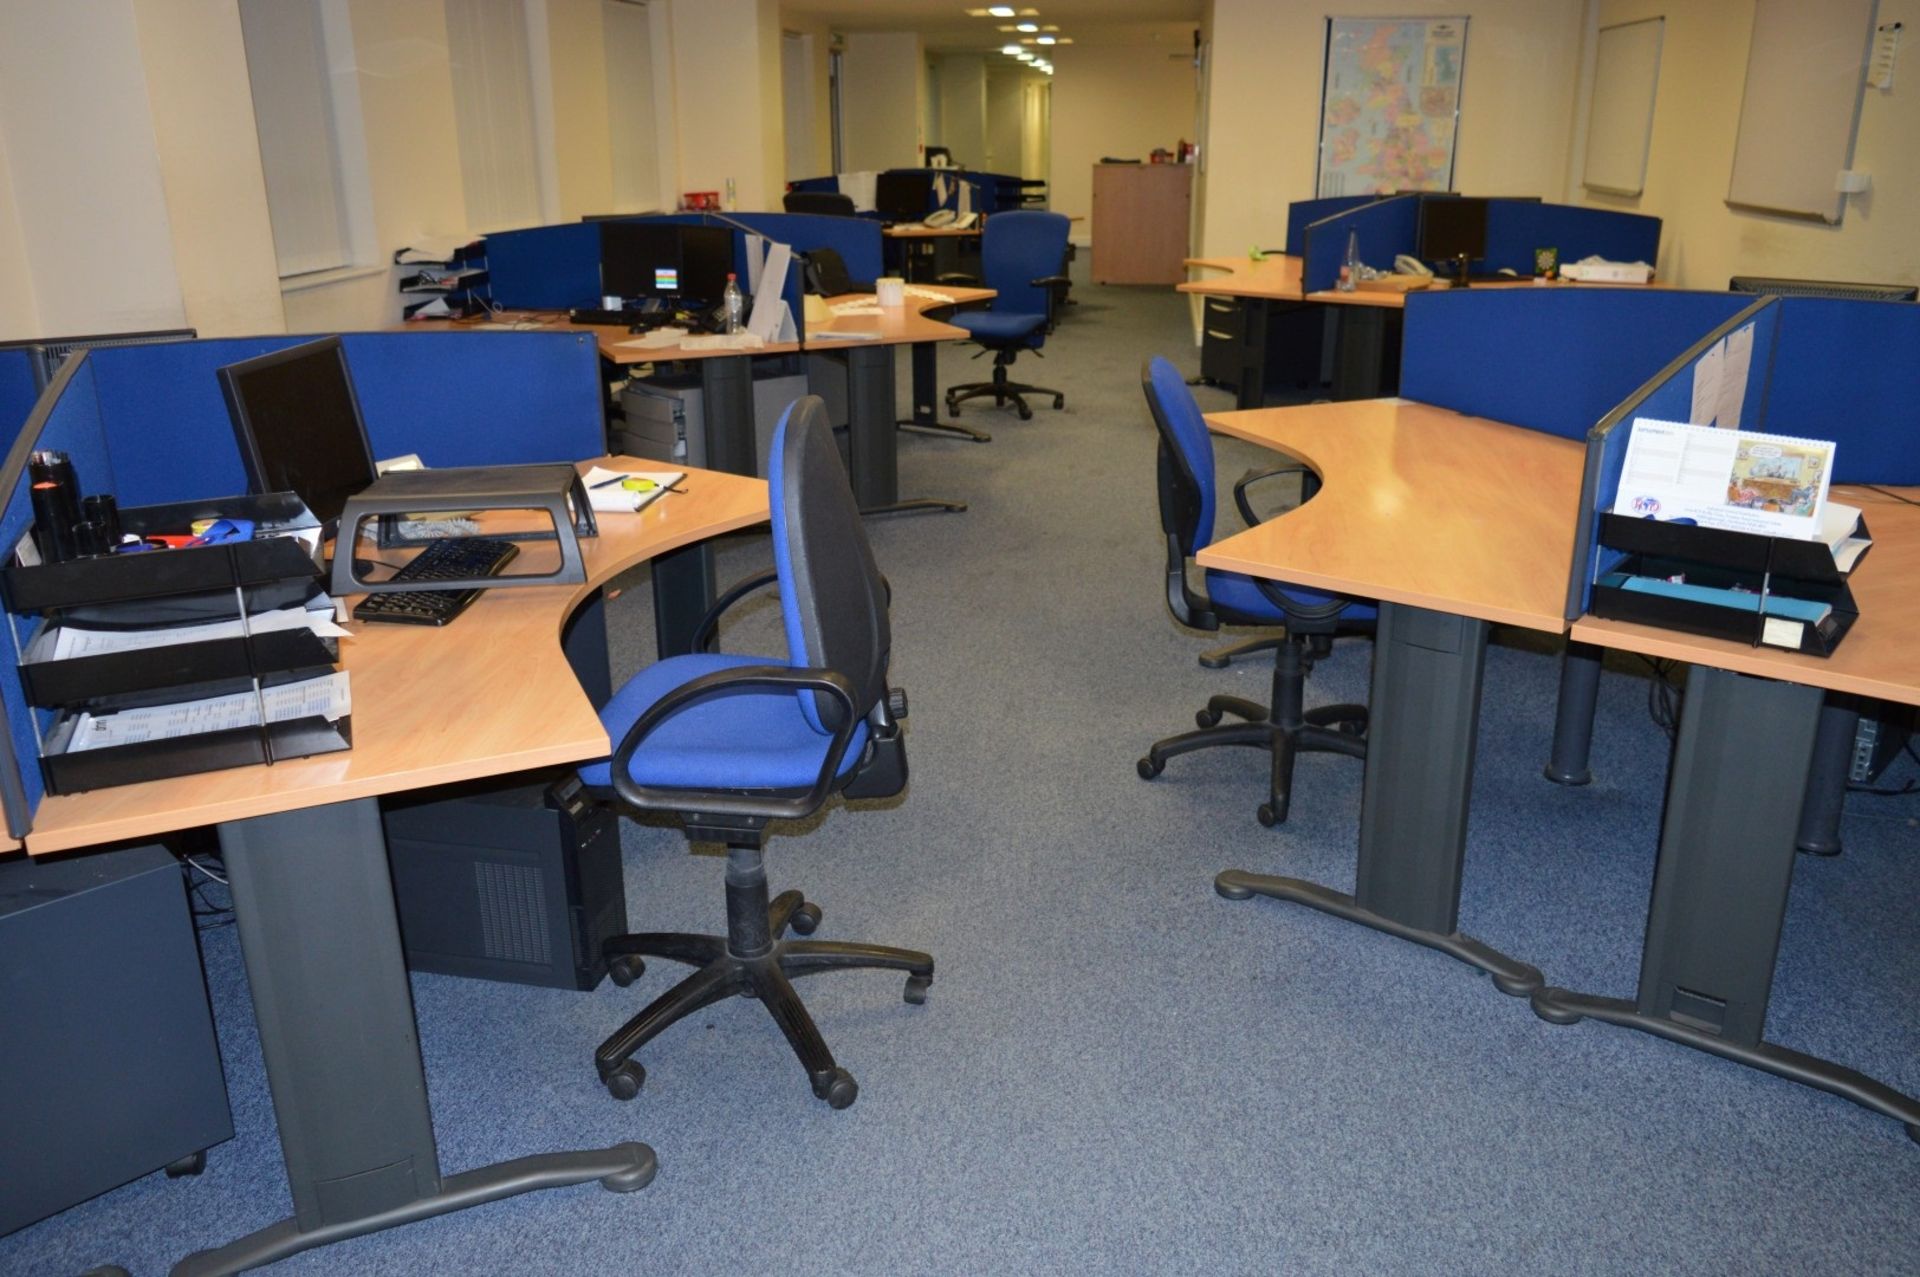 1 x Tripod Office Workstation Desk With Chairs - Suitable For 3 Users - Includes Three Premium - Image 4 of 6